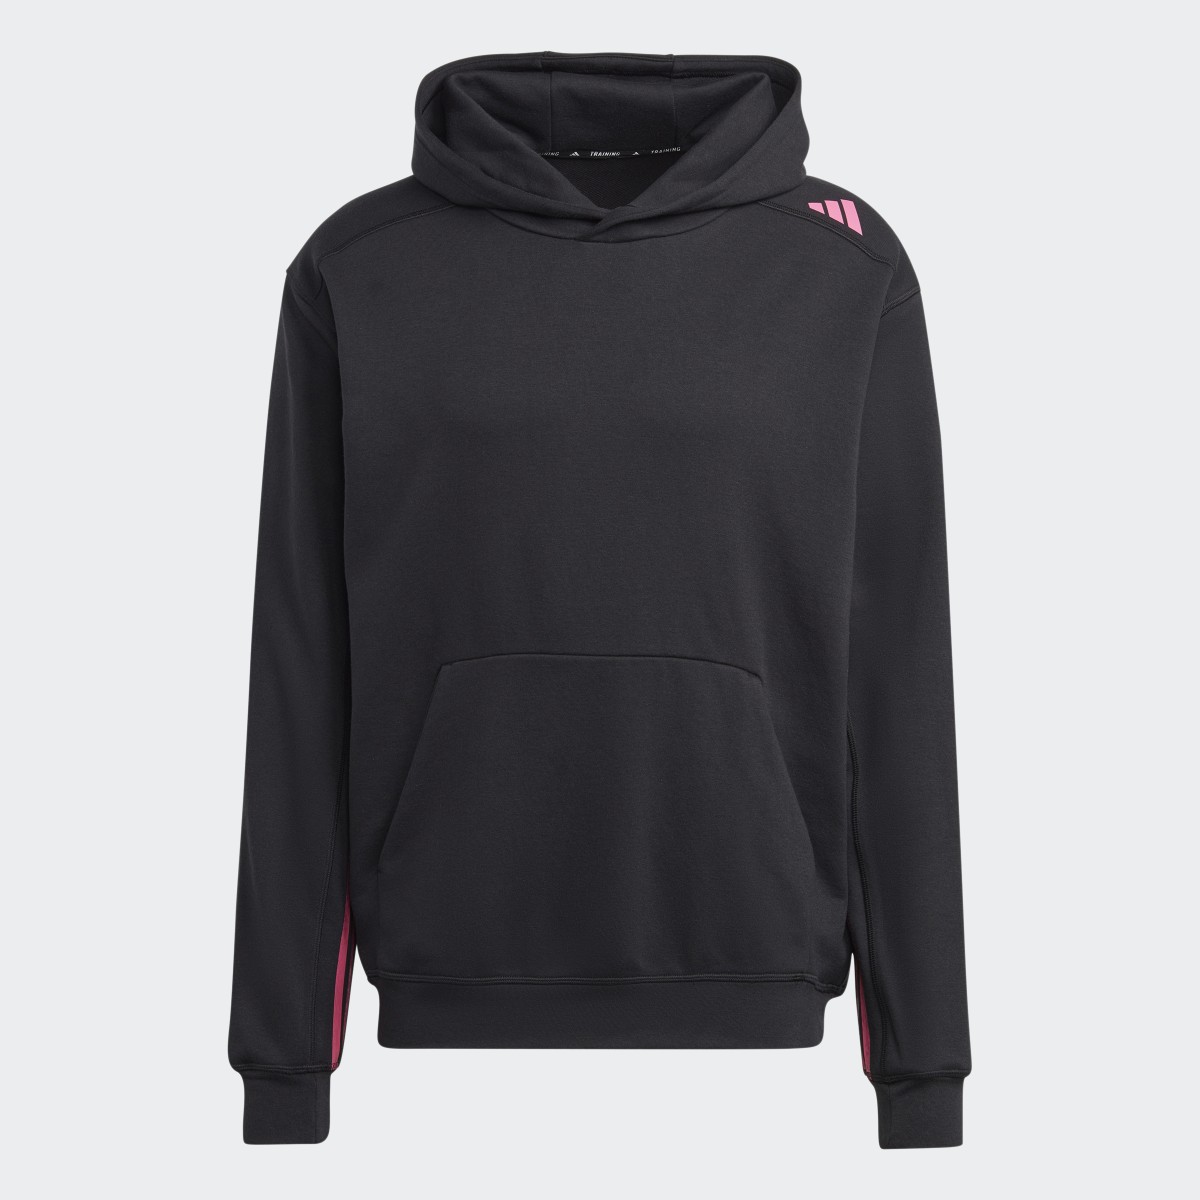 Adidas Curated by Cody Rigsby HIIT Hoodie. 5